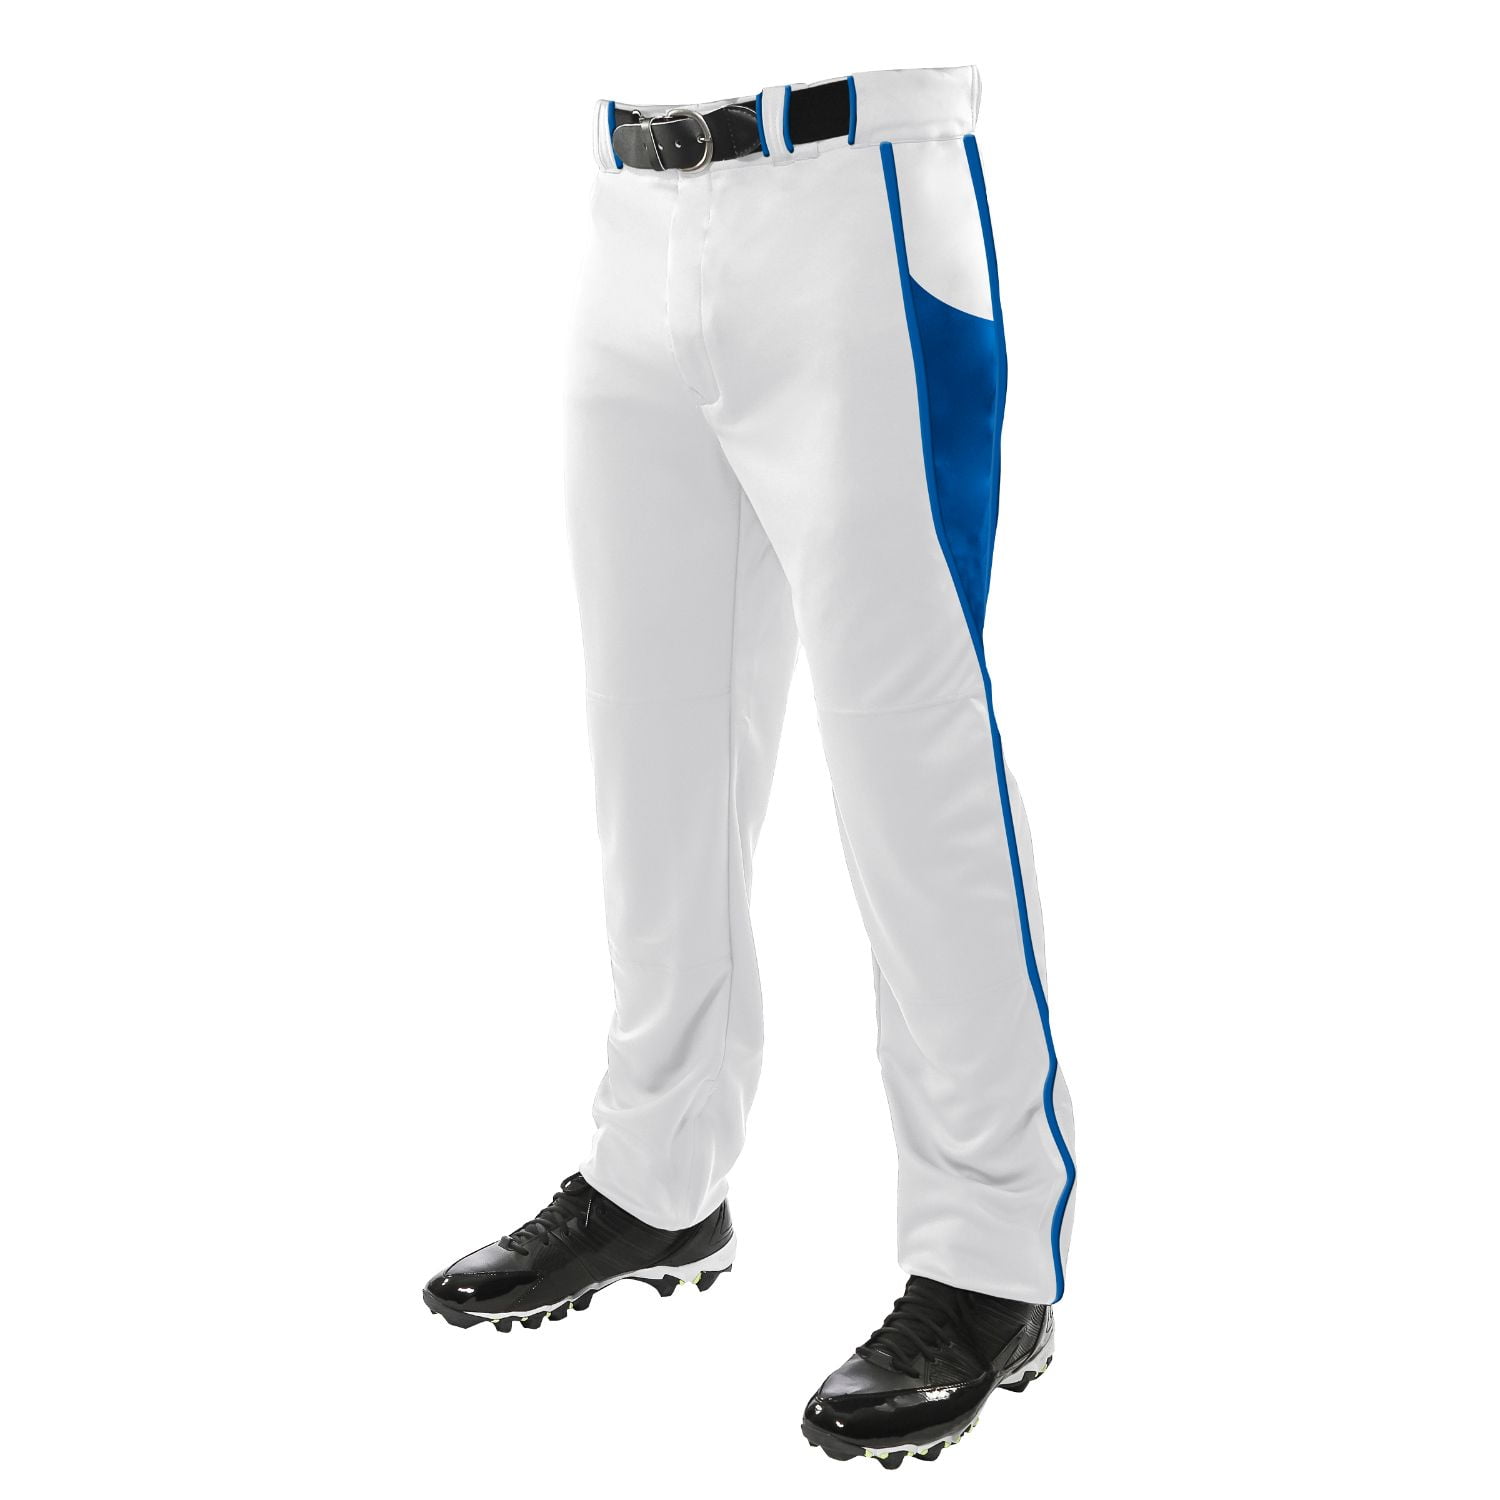 Champro Triple Crown Open Bottom Baseball Pants with Royal Blue Piping XL New✅✅✅ 